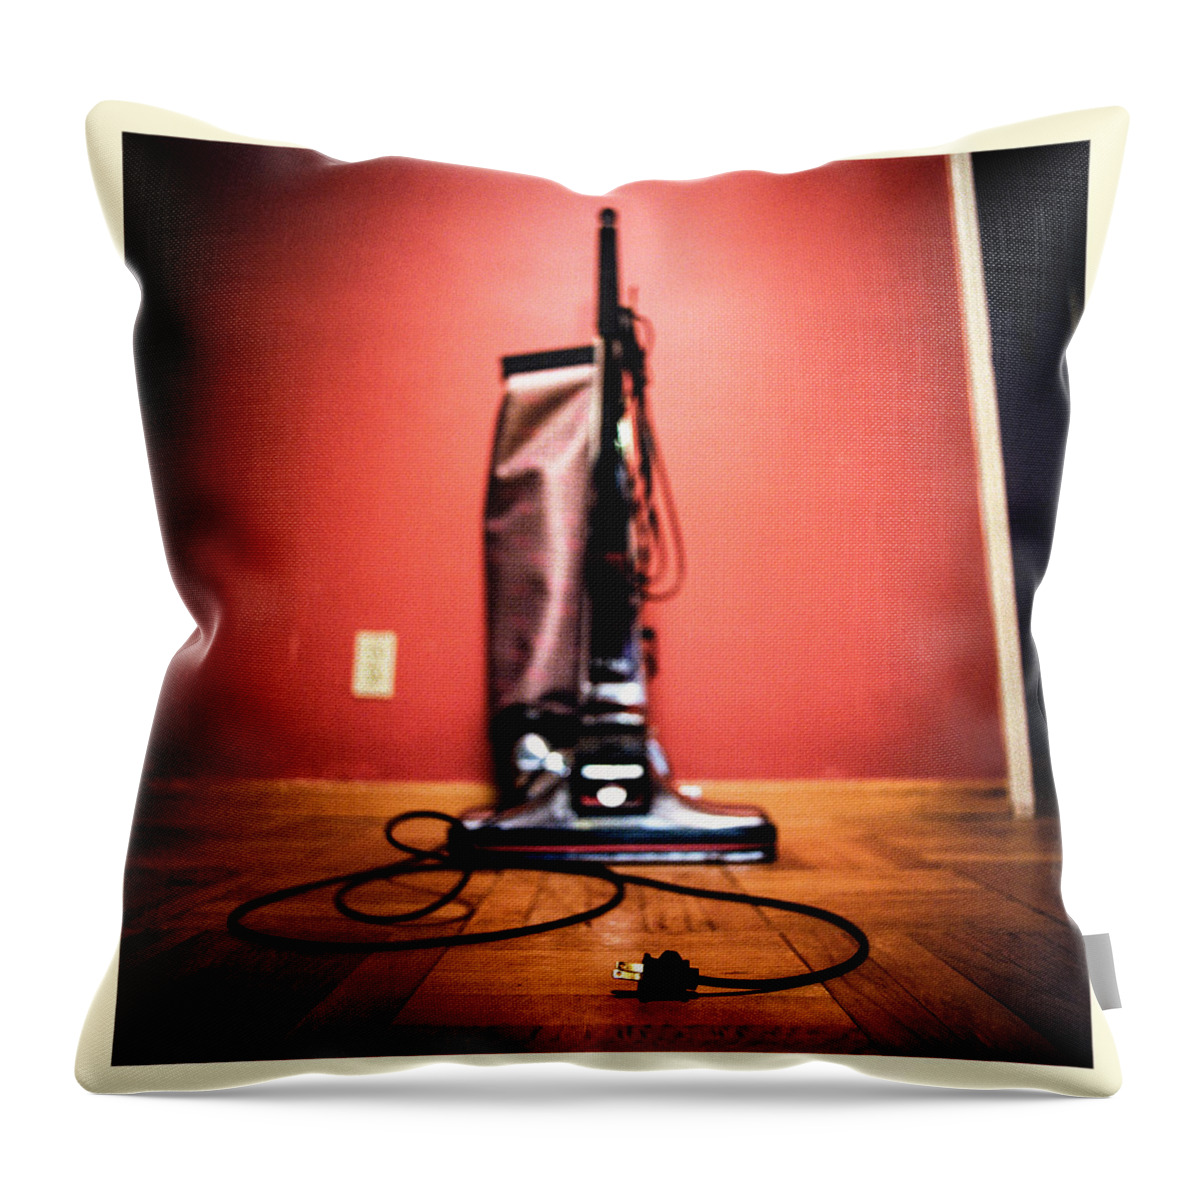 Dirty Throw Pillow featuring the photograph Classic Kirby Vacuum by Yo Pedro